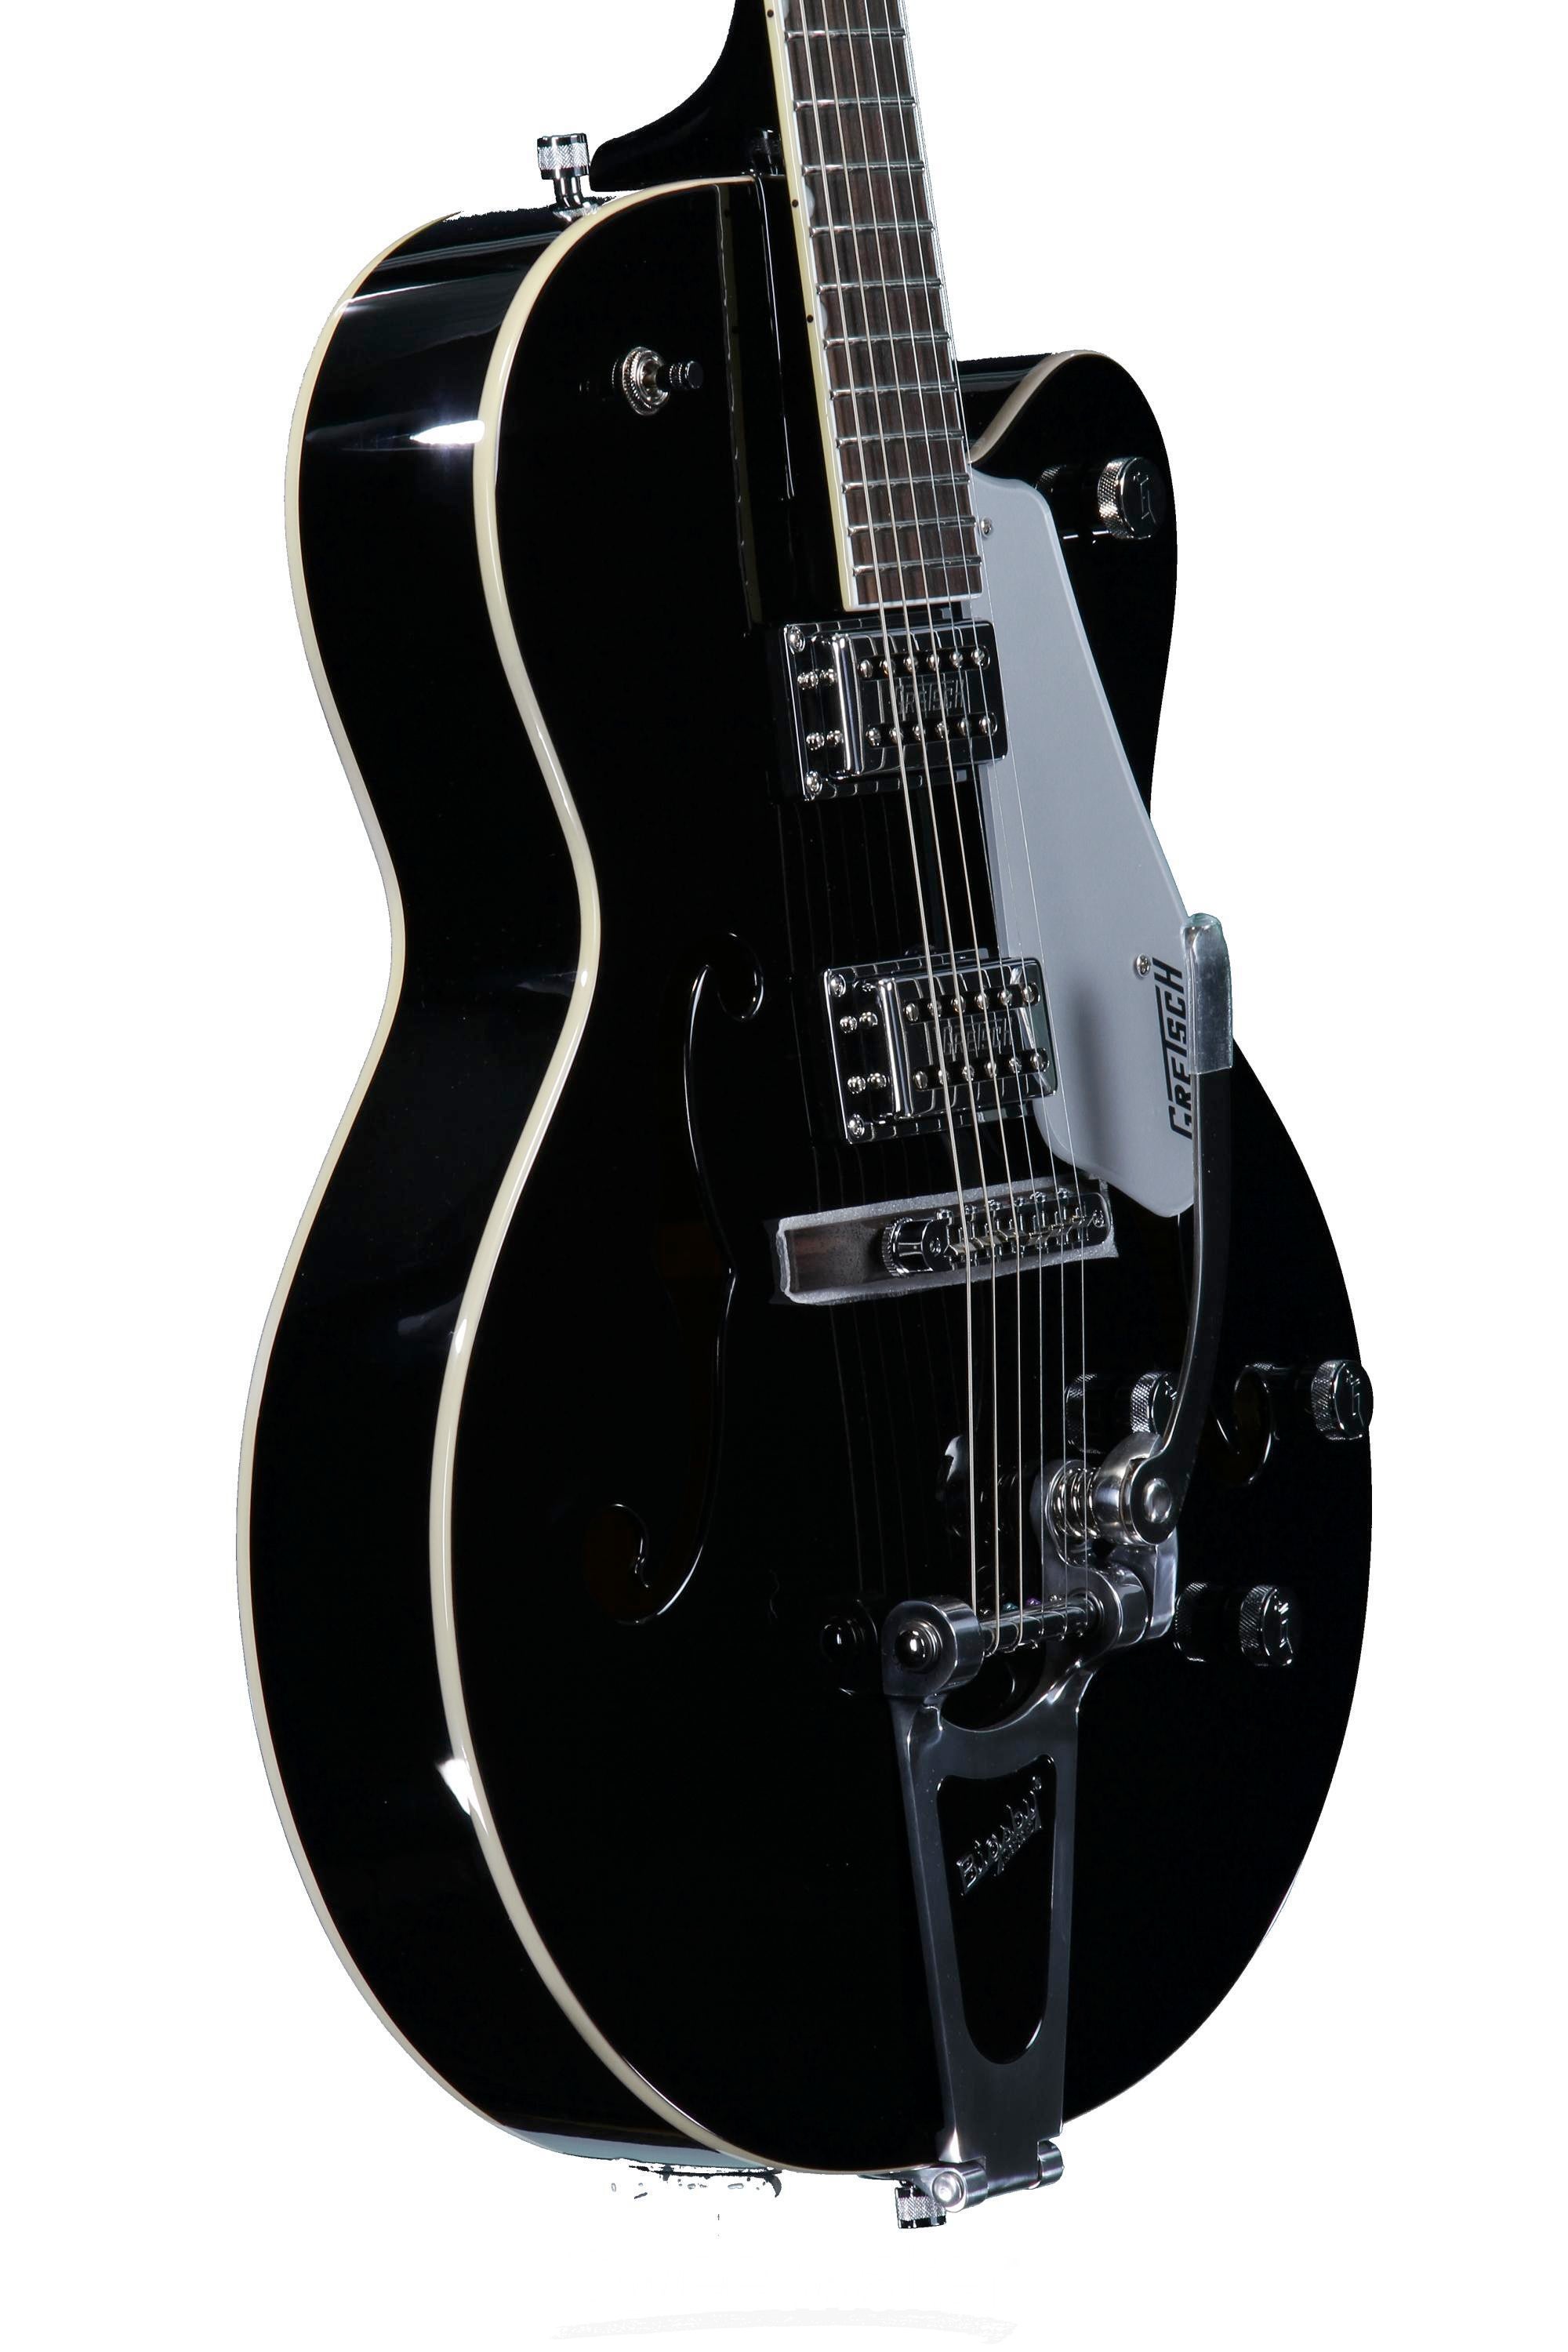 Gretsch G5120 Electromatic Hollow Body - Black | Sweetwater